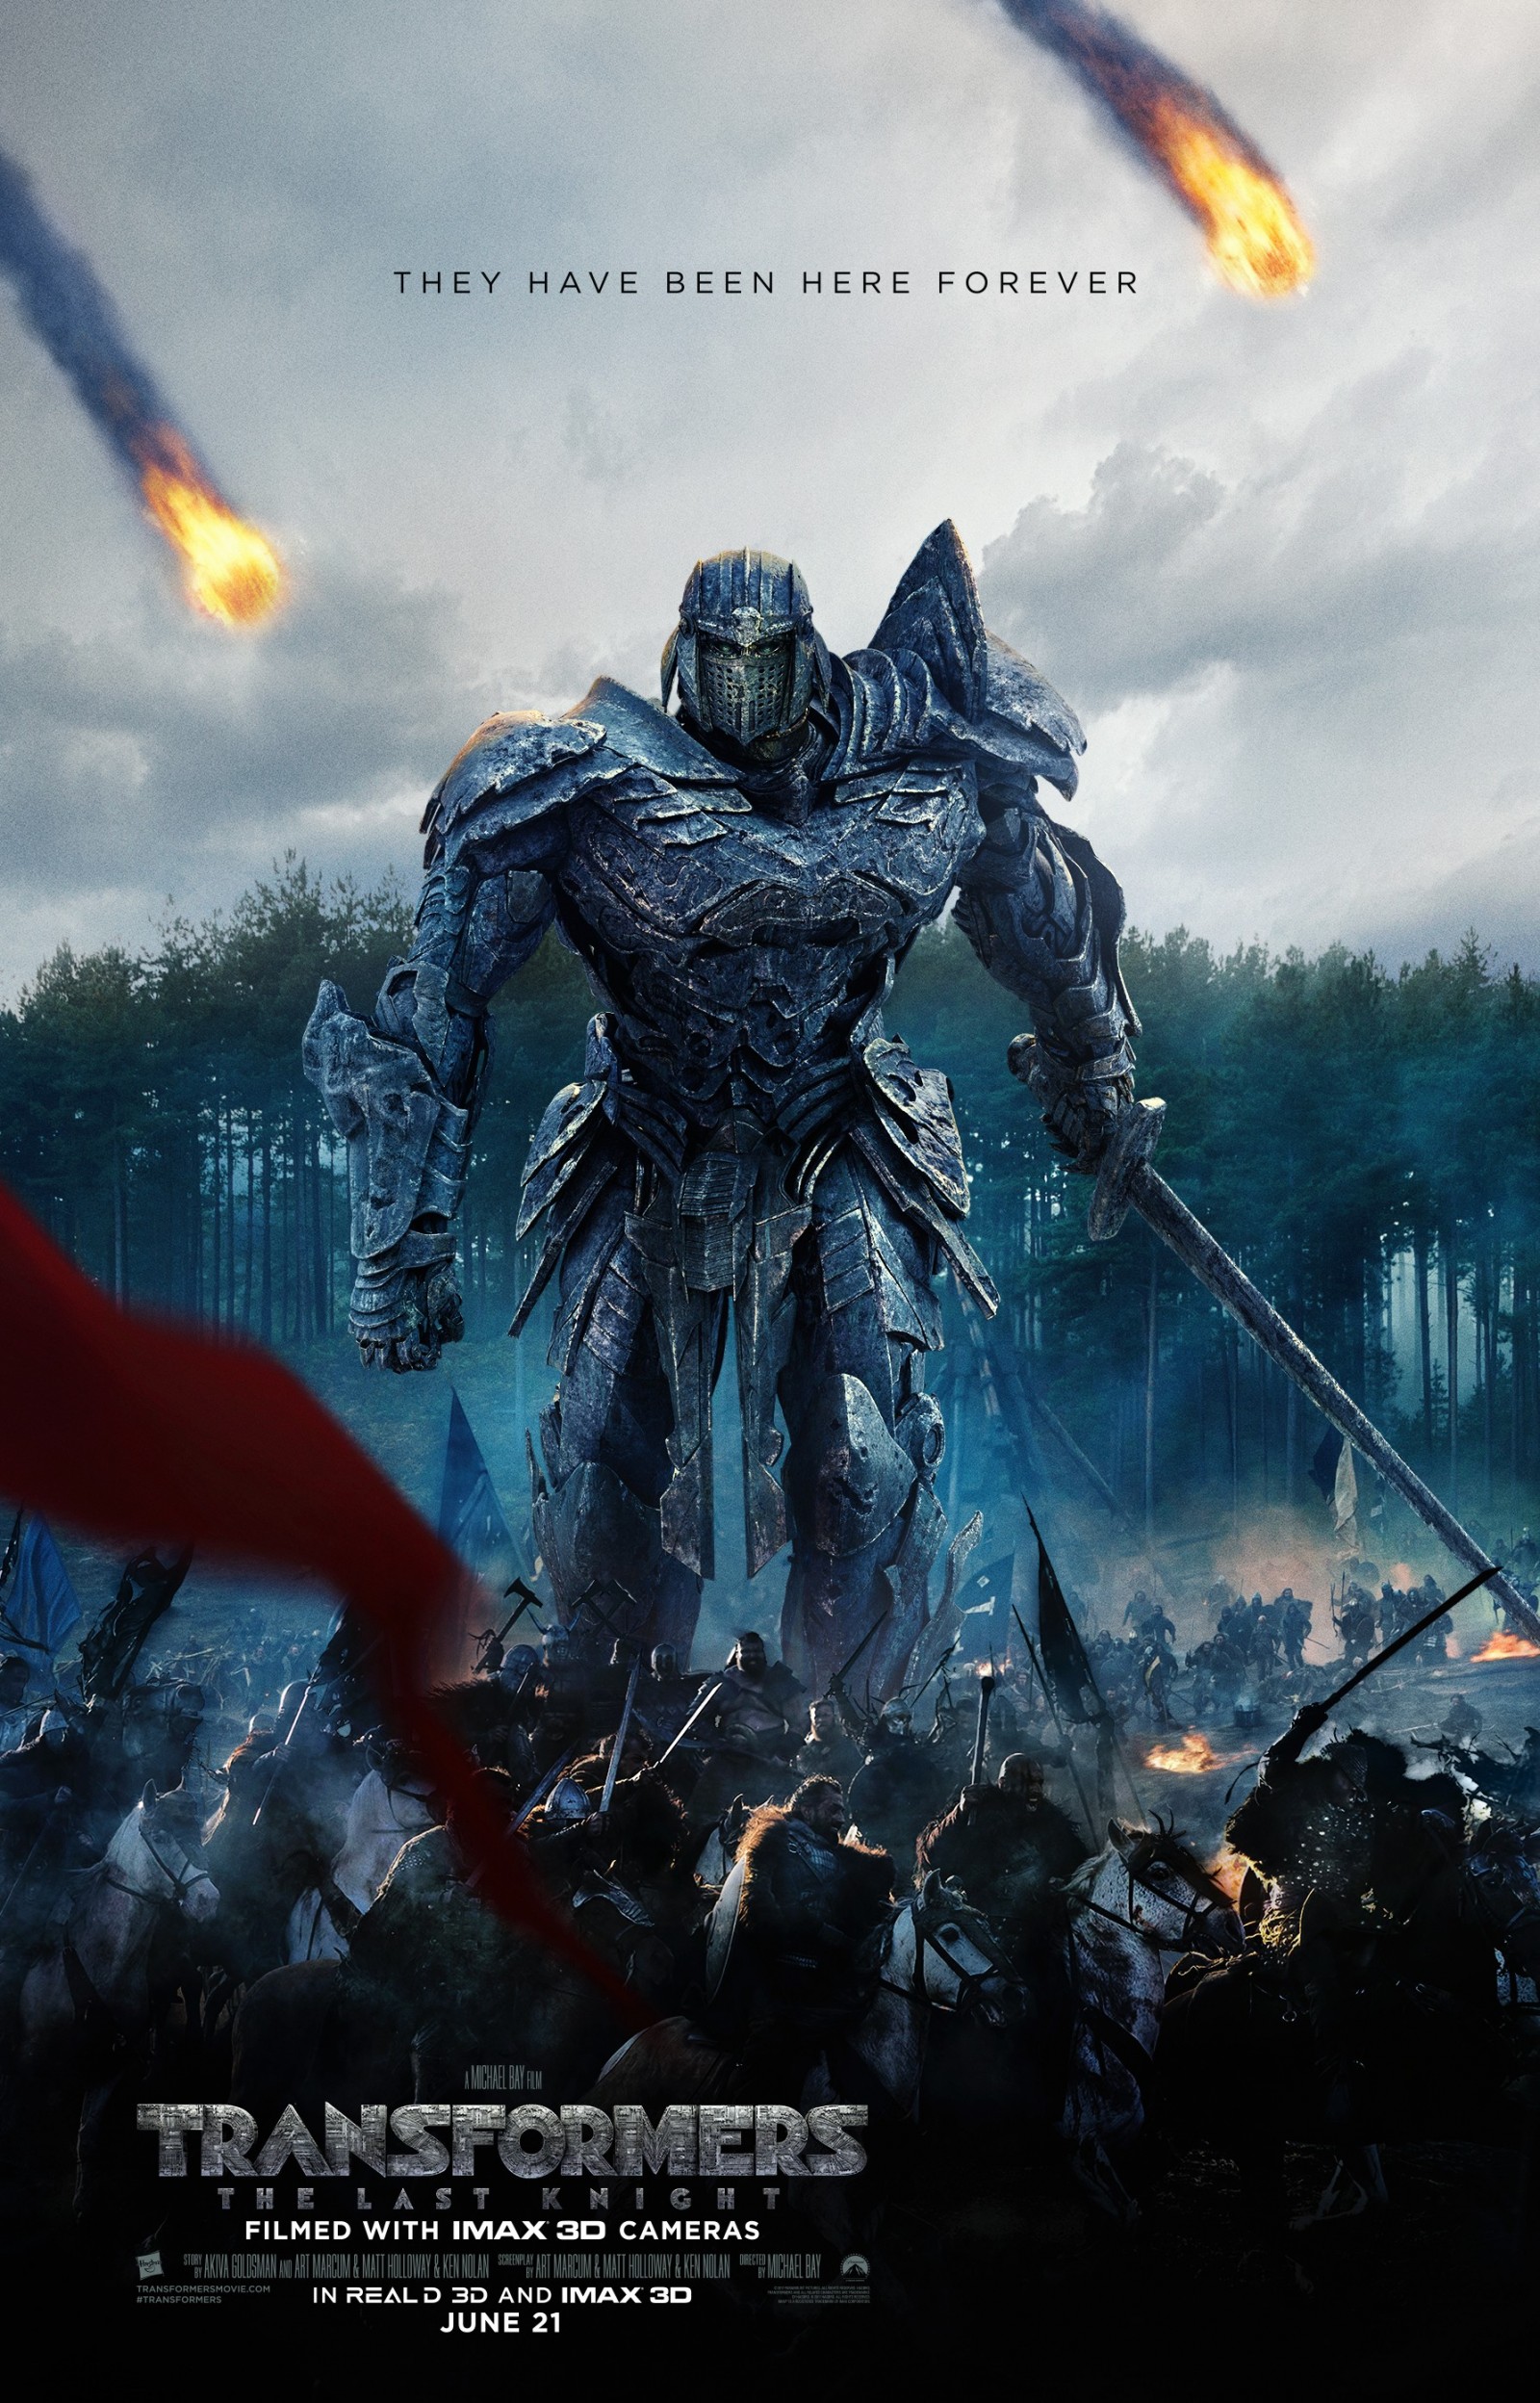 Transformers News: New Last Knight "Every Legend Hides A Secret" Poster featuring Bumblebee during WWII